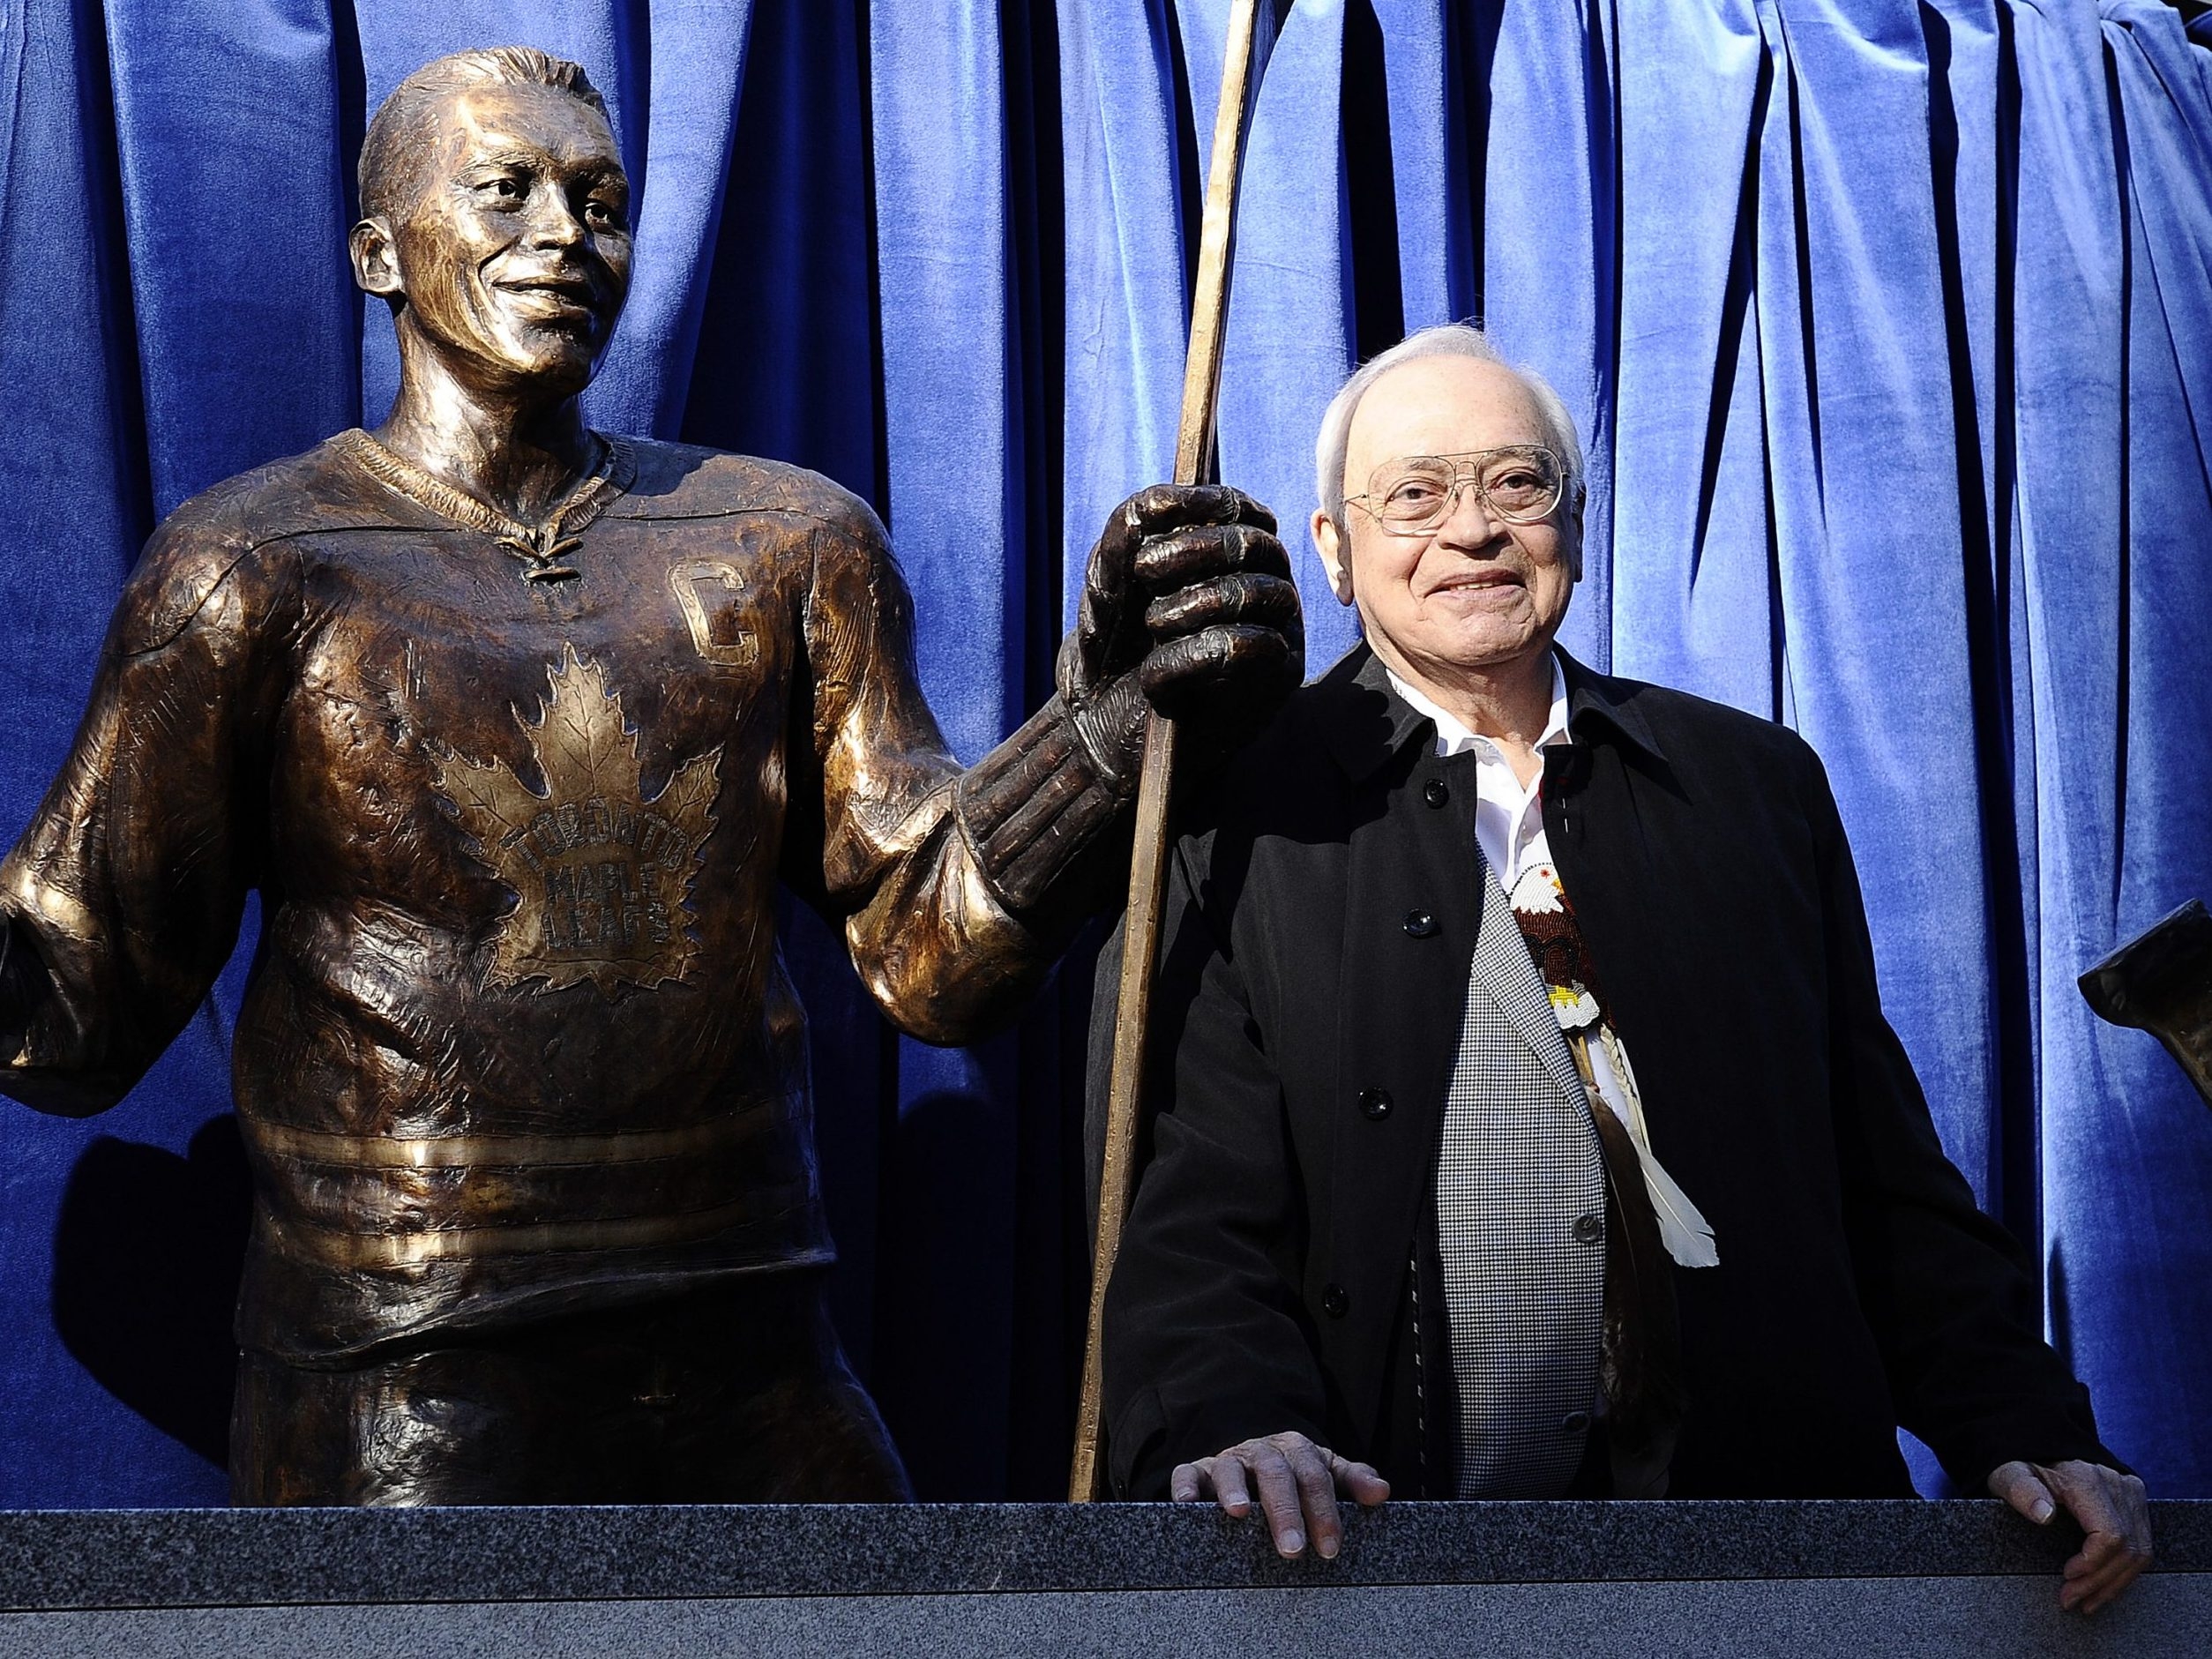 The day Leafs legend Dave Keon almost became a King